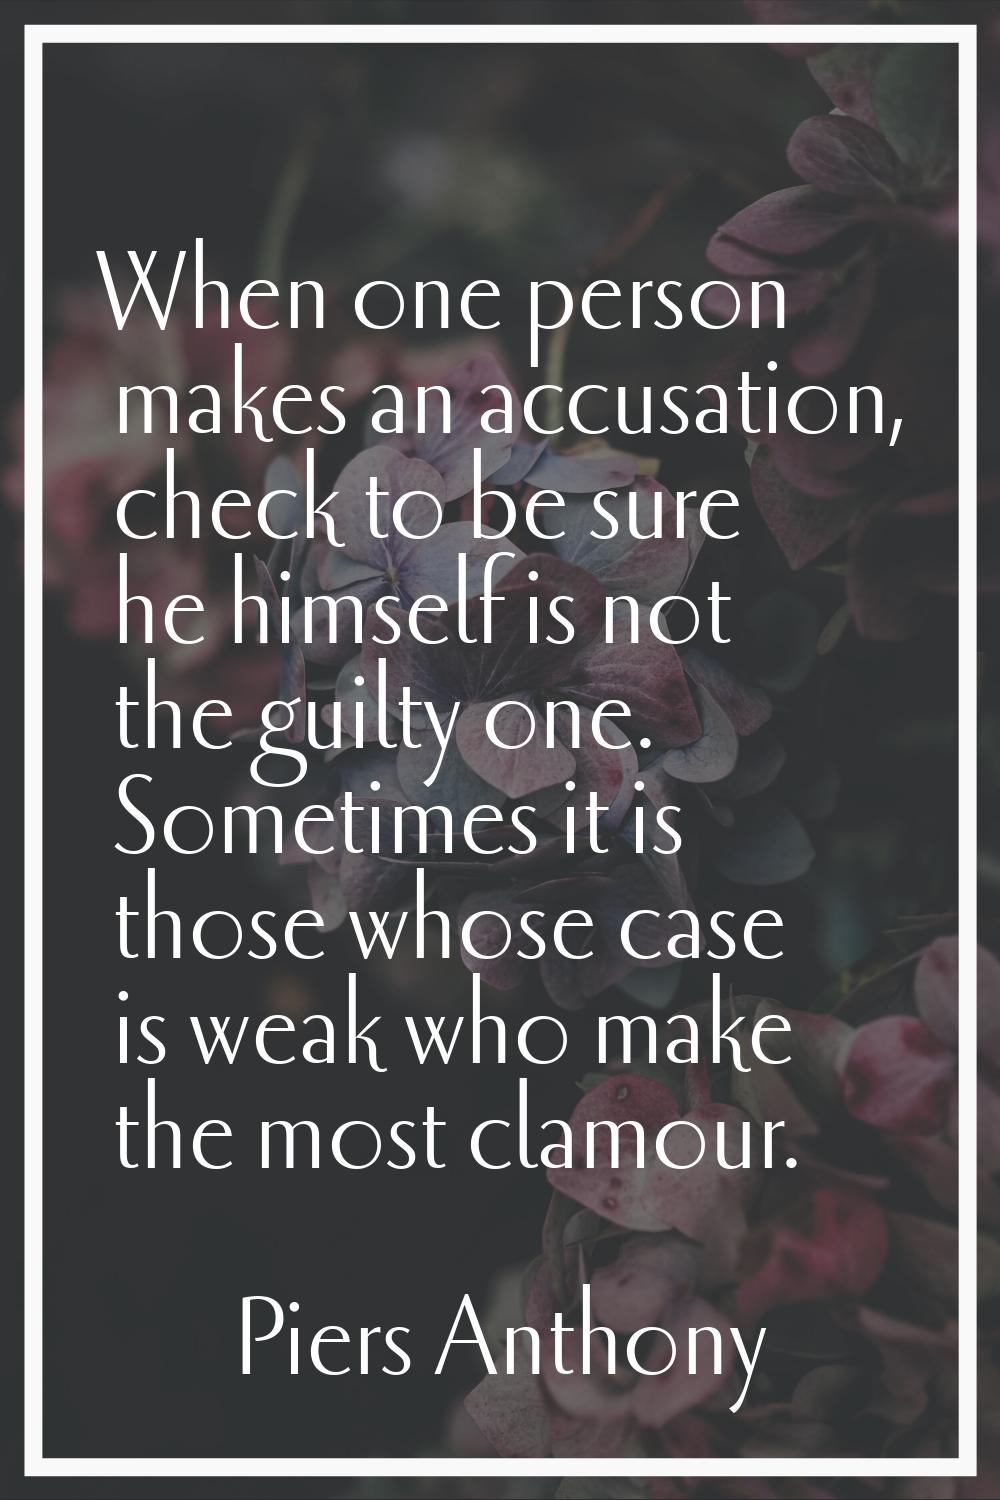 When one person makes an accusation, check to be sure he himself is not the guilty one. Sometimes i